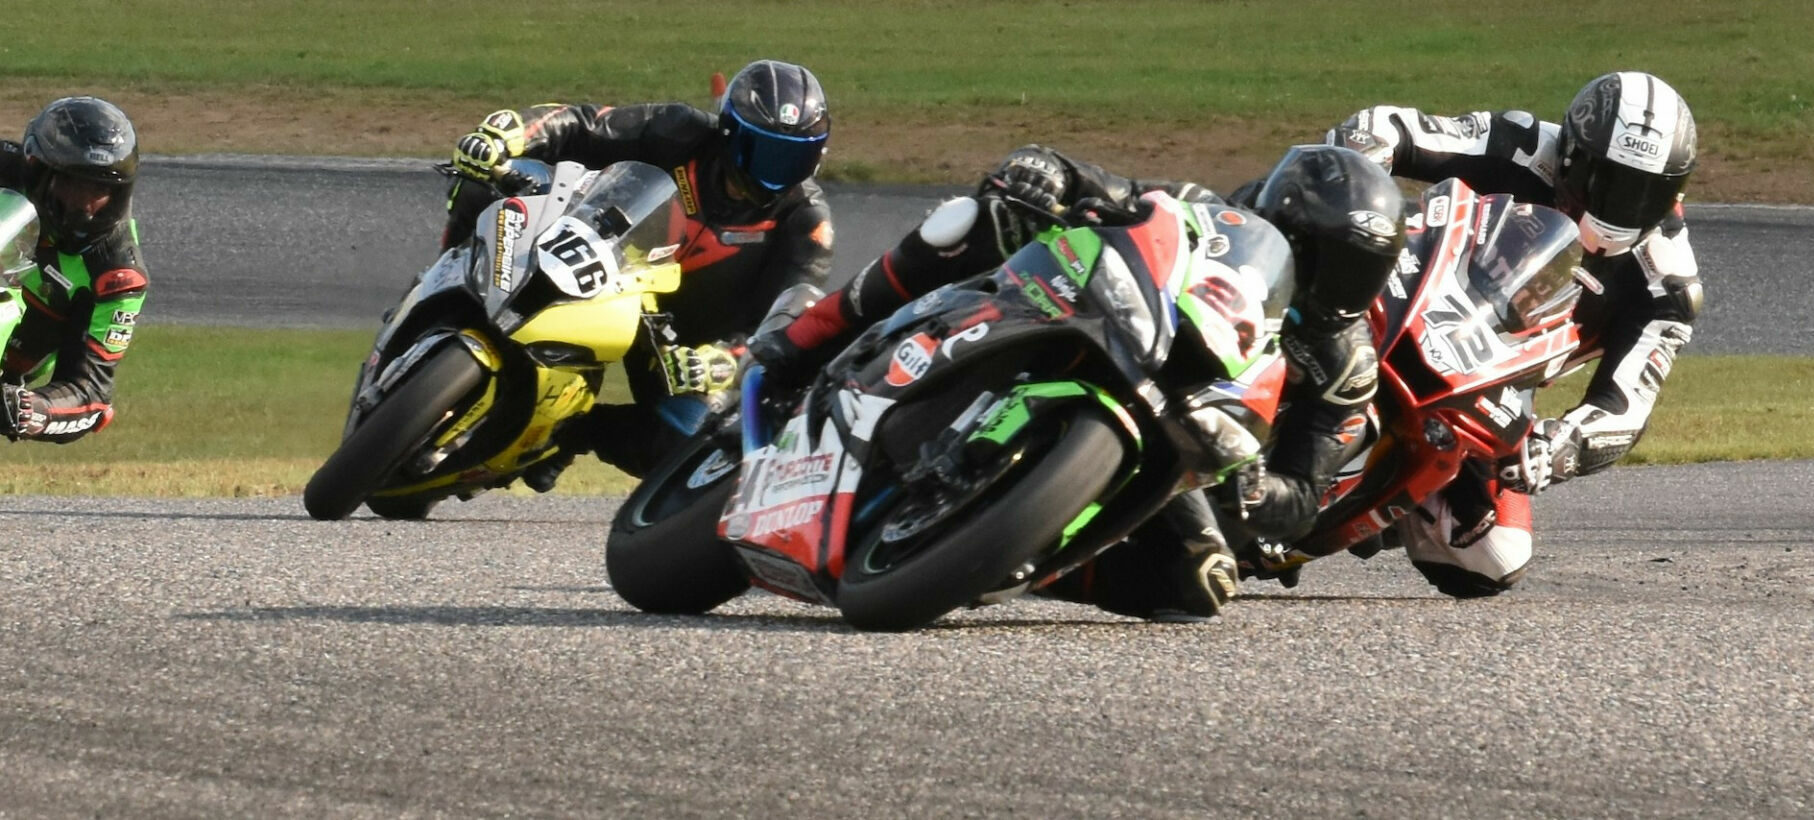 Sebastien Tremblay (24) denies a last-corner pass from Ernest Bernhard (72) with Marc Labossiere (166) and Cedric Leclair (889) close behind in the Pro 6 GP finale at Calabogie. Photo by Colin Fraser, courtesy CSBK/PMP.